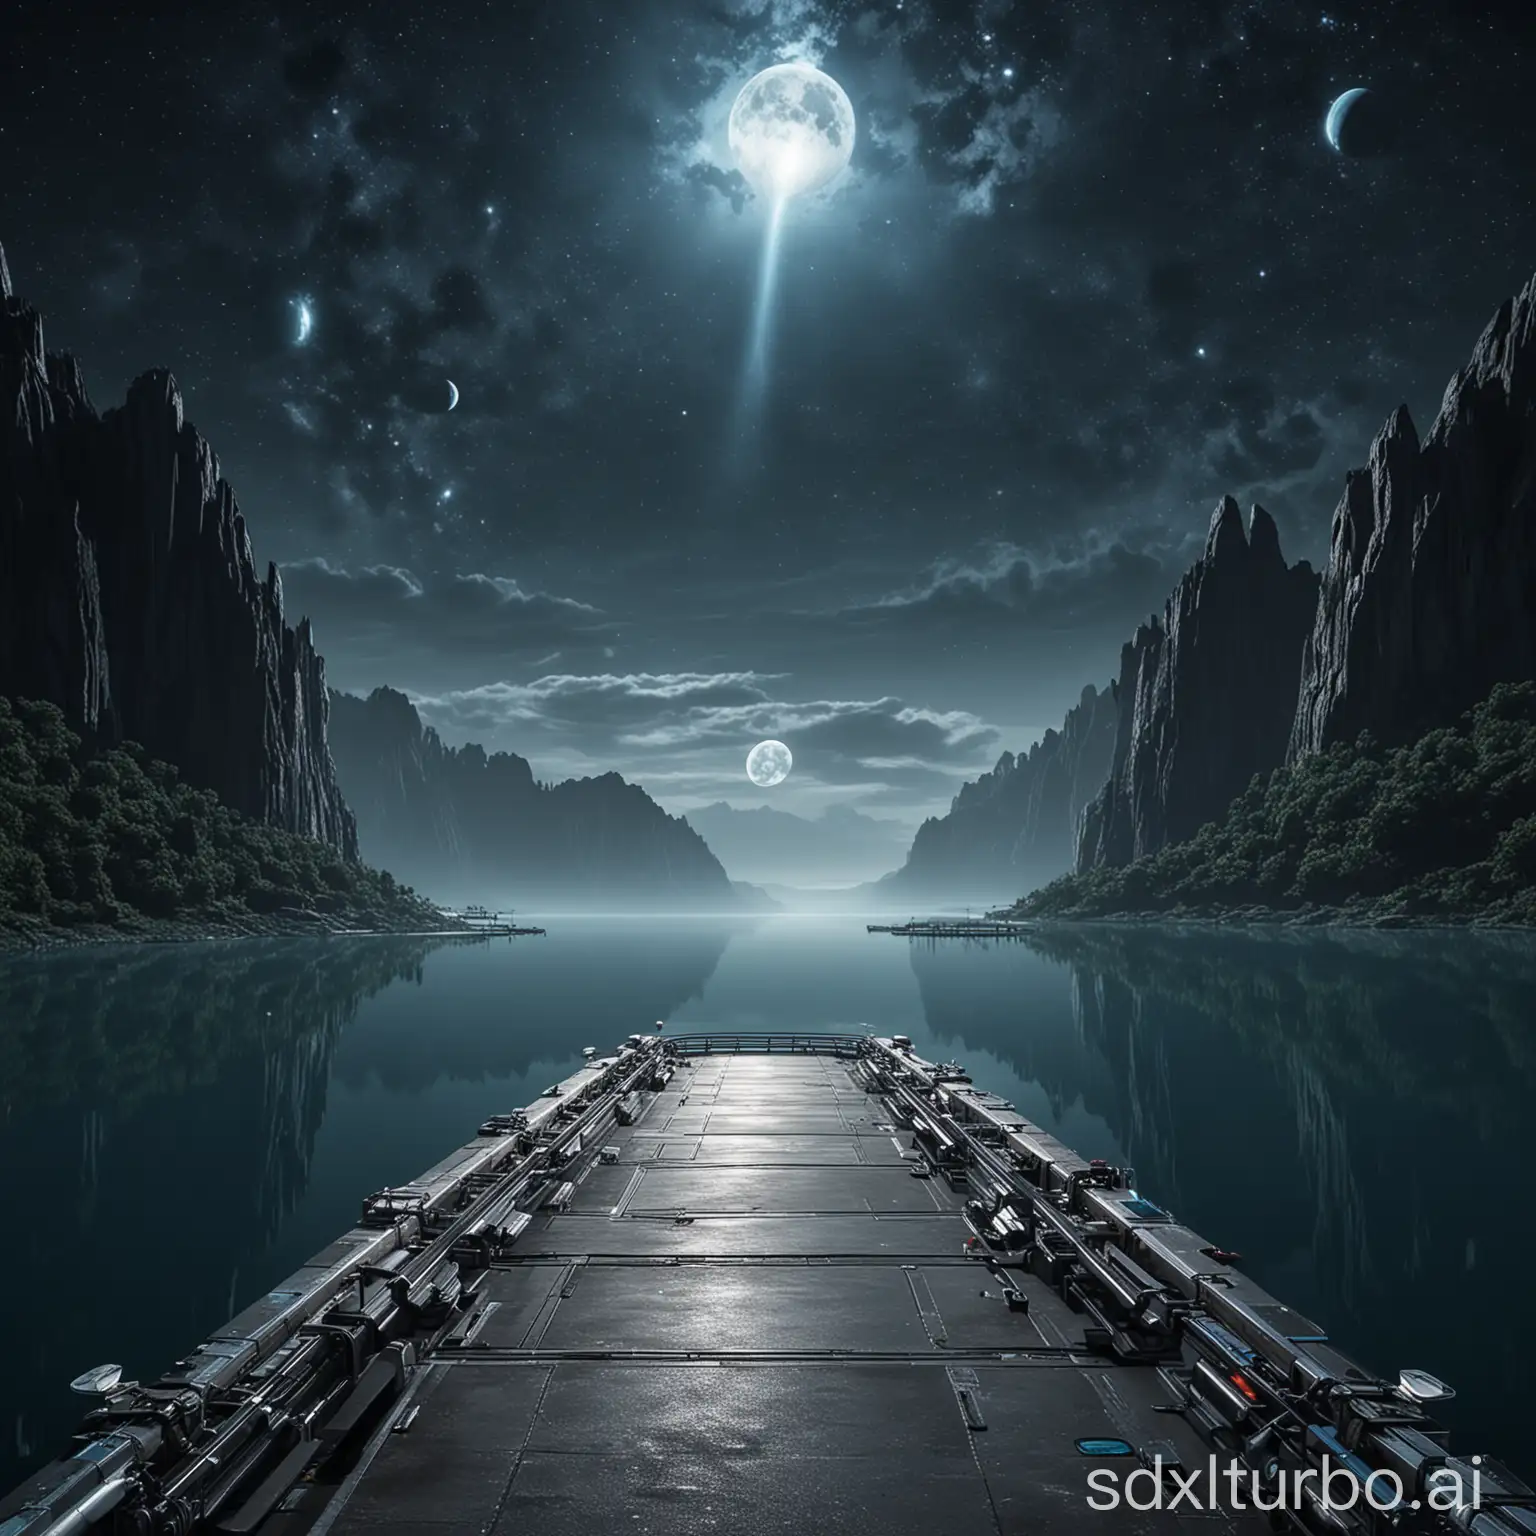 Night Futuristic platform with lake and planet view. The Platform has to be front  and heading for the planet